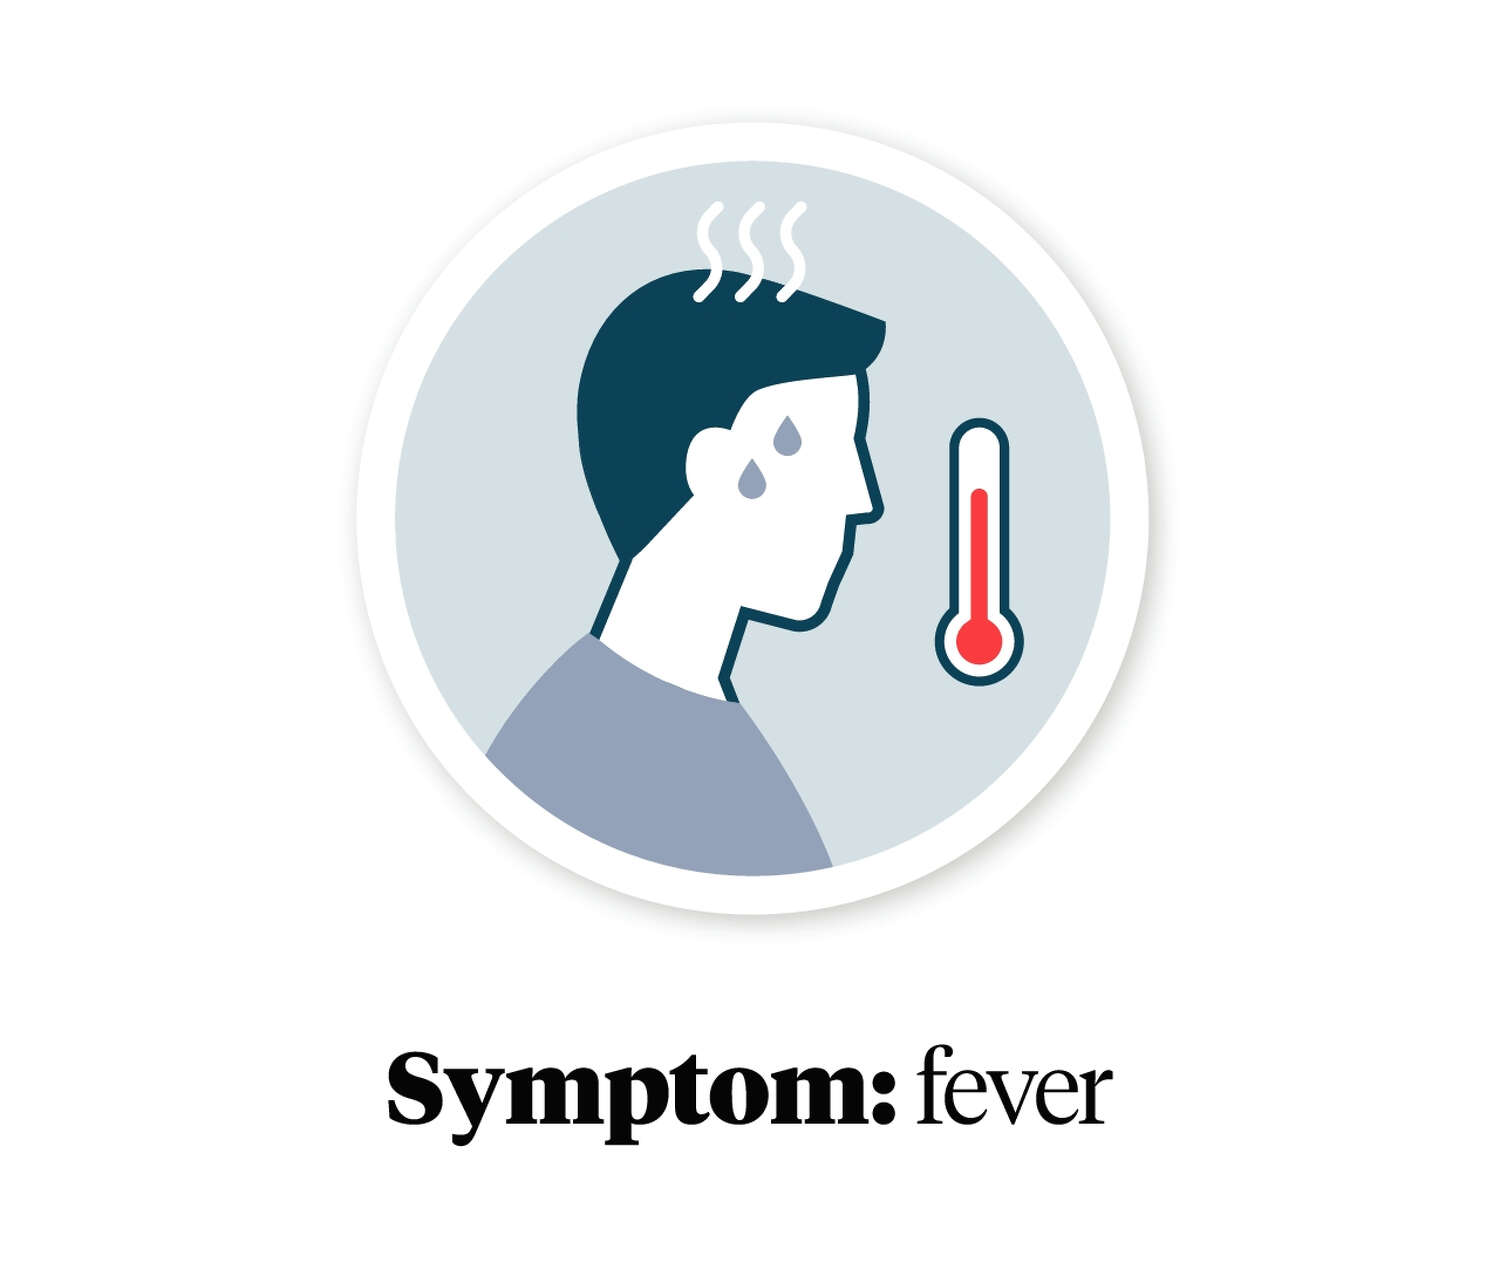 Graphic showing a person with a fever